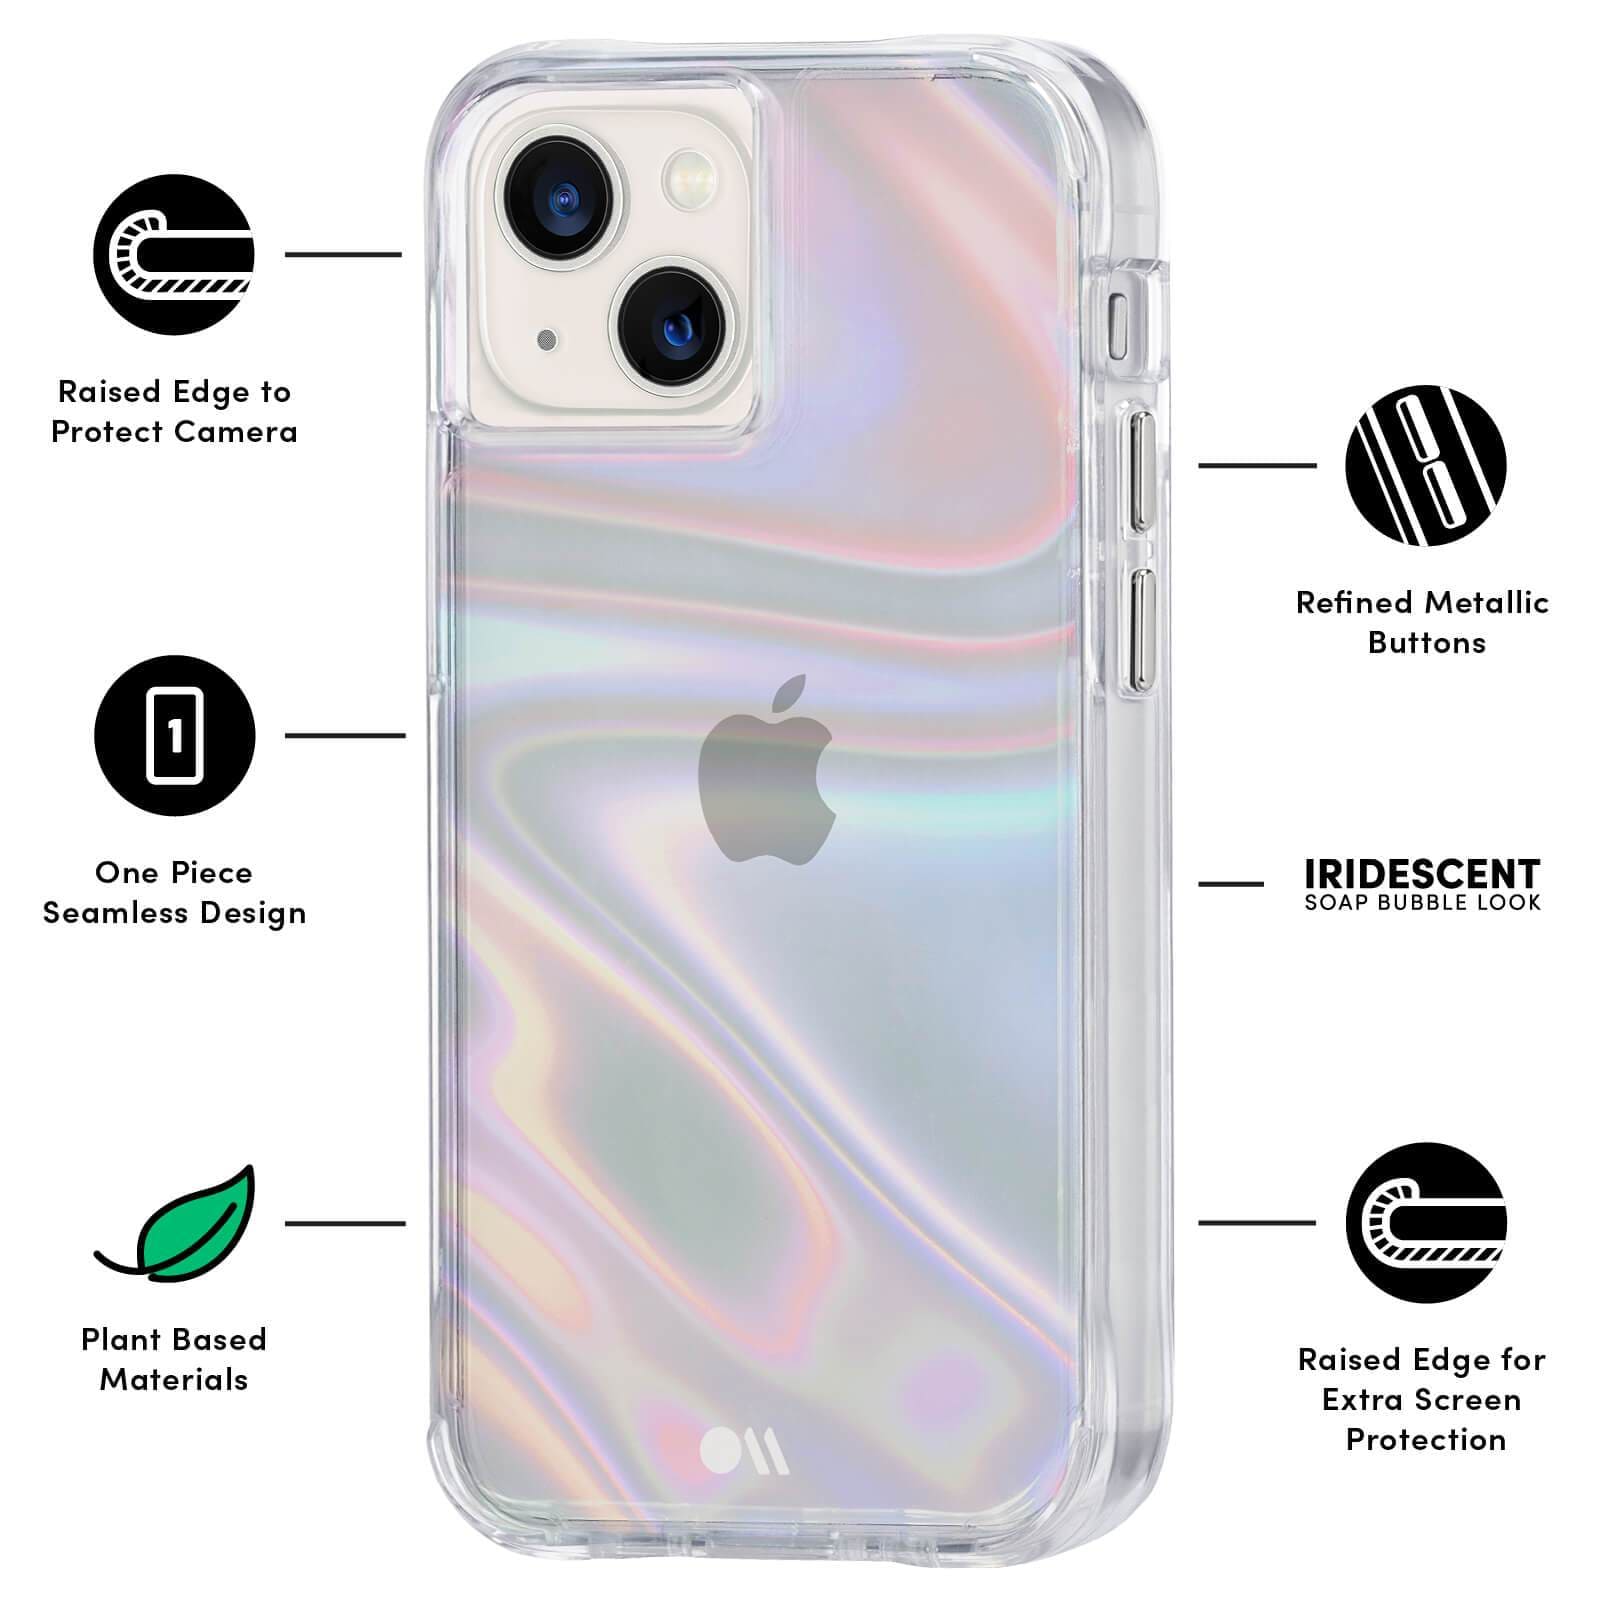 FEATURES: RAISED EDGE TO PROTECT CAMERA, ONE PIECE SEAMLESS DESIGN, PLANT BASED MATERIALS, REFINED METALLIC BUTTONS, IRIDESCENT SOAP BUBBLE LOOK, RAISED EDGE FOR EXTRA SCREEN PROTECTION. COLOR::SOAP BUBBLE